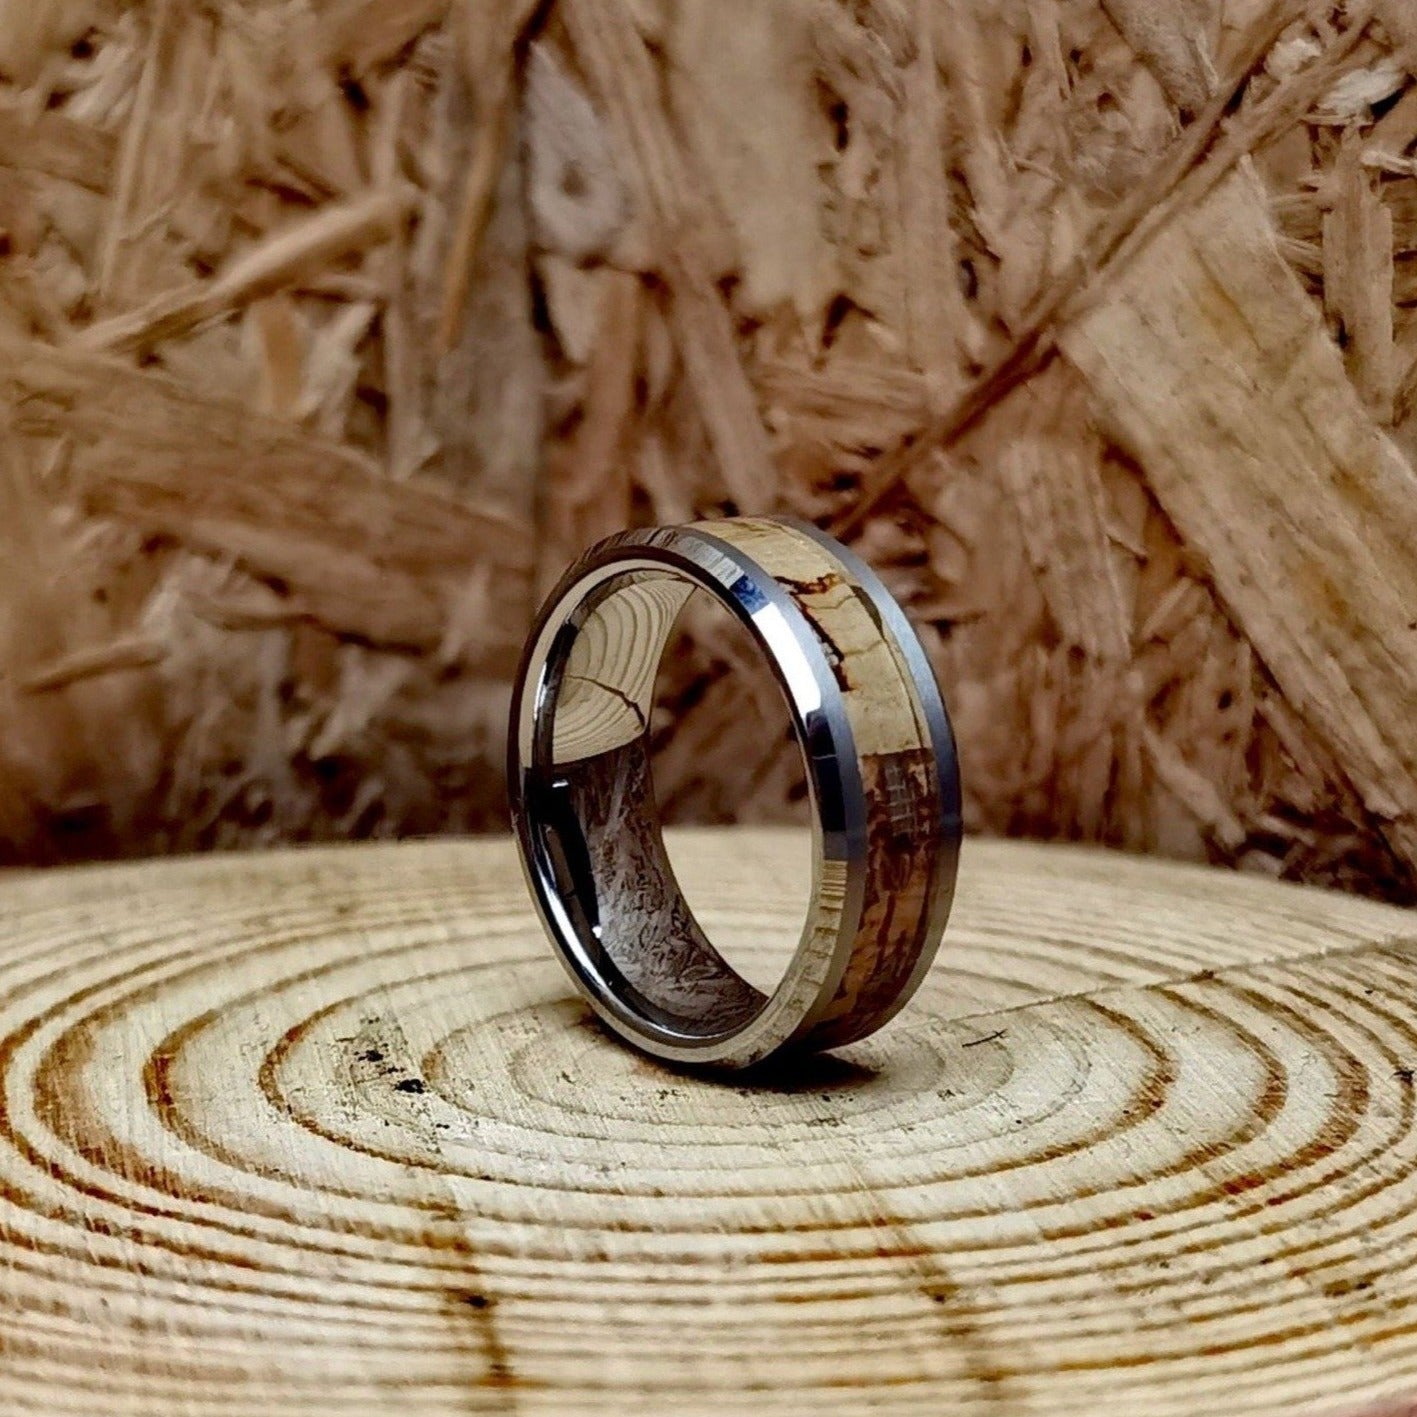 Johnny Cage - Cork Wood Tungsten Ring